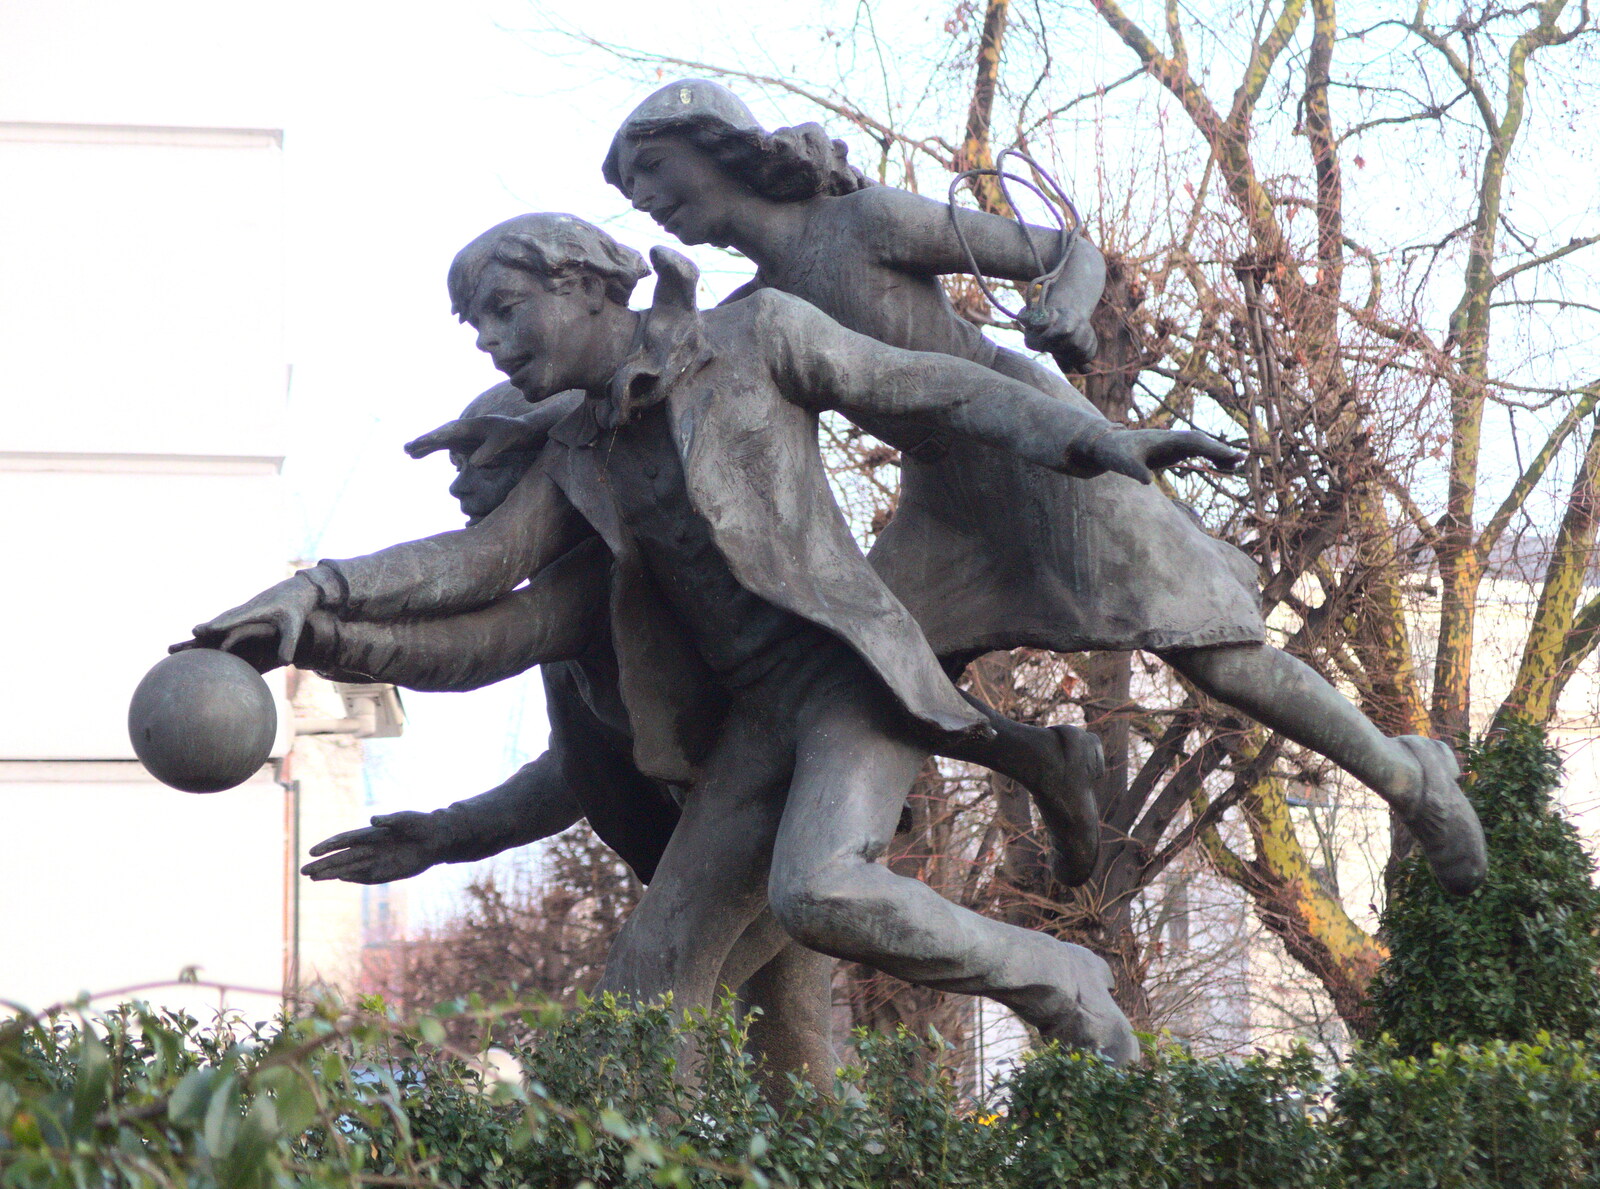 A statue of some children chasing a ball from A Work Lunch in Nandos, Bayswater Grove, West London - 20th December 2017